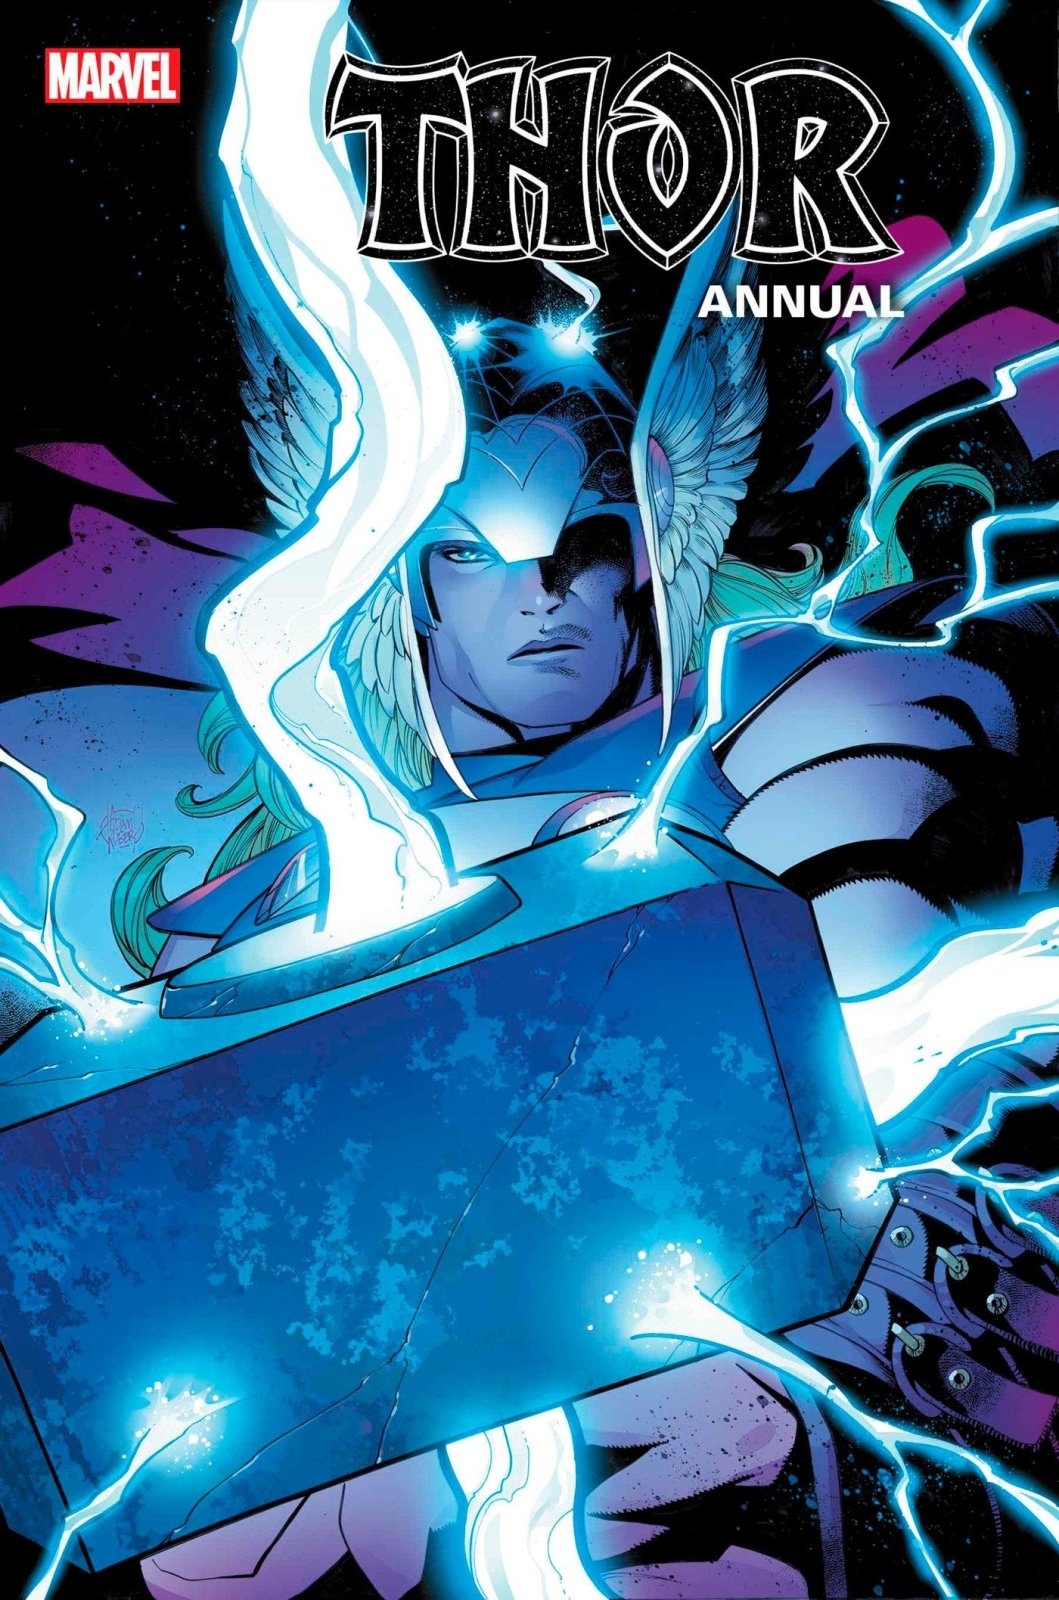 Thor Annual 1 - The Fourth Place